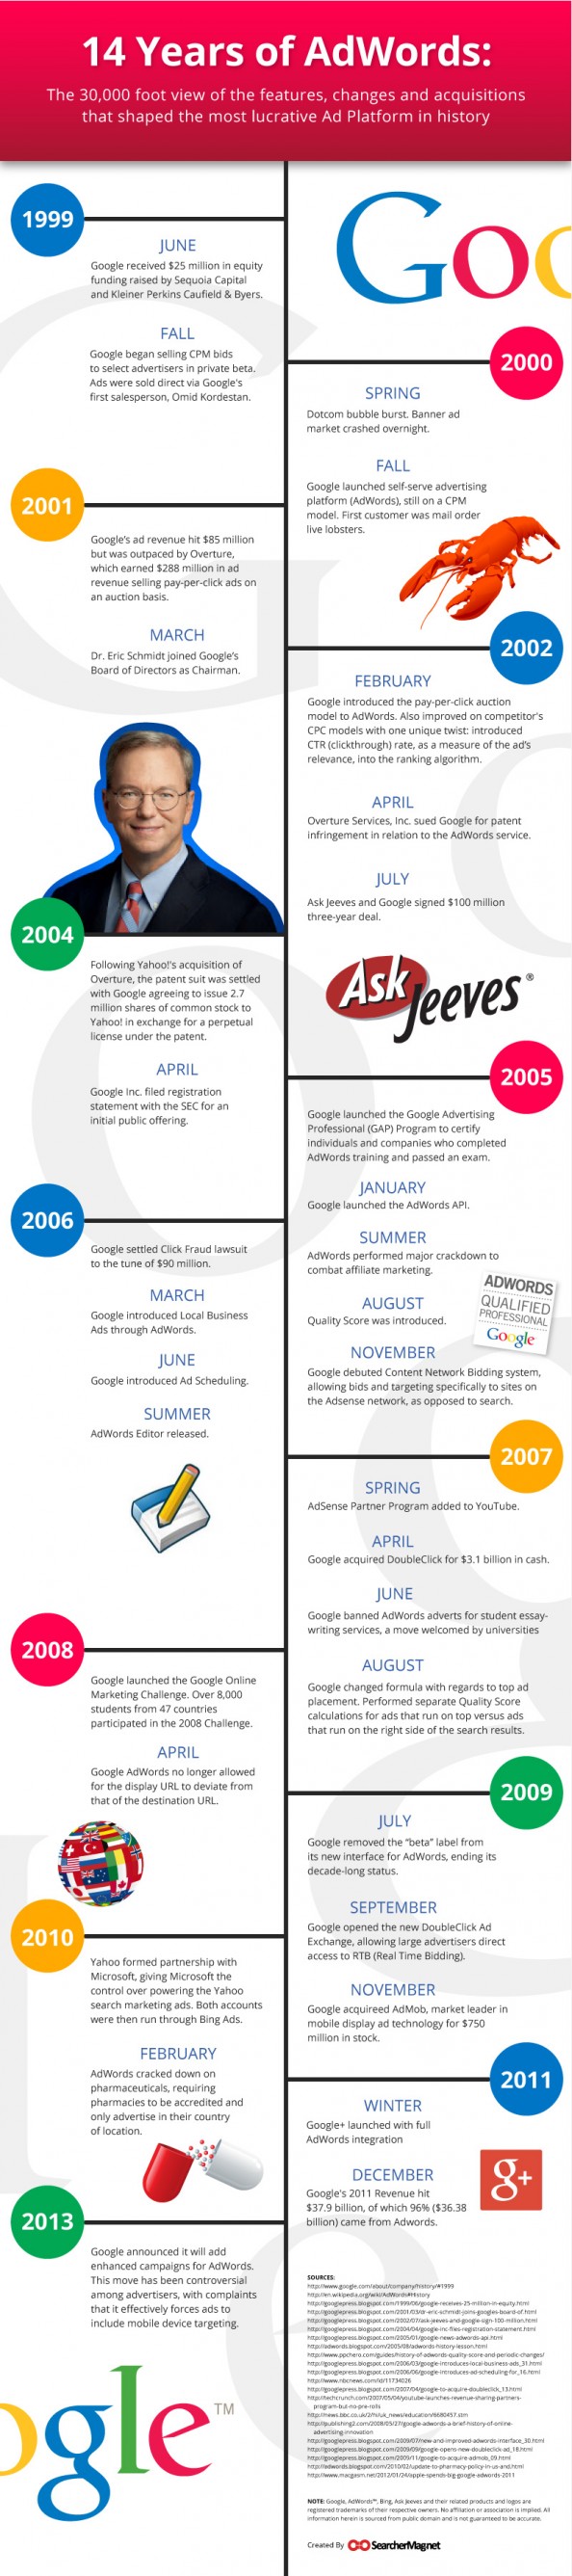 1616544865_479_Advertising-Infographics-14-Years-of-Adwords Advertising Infographics : 14 Years of Adwords